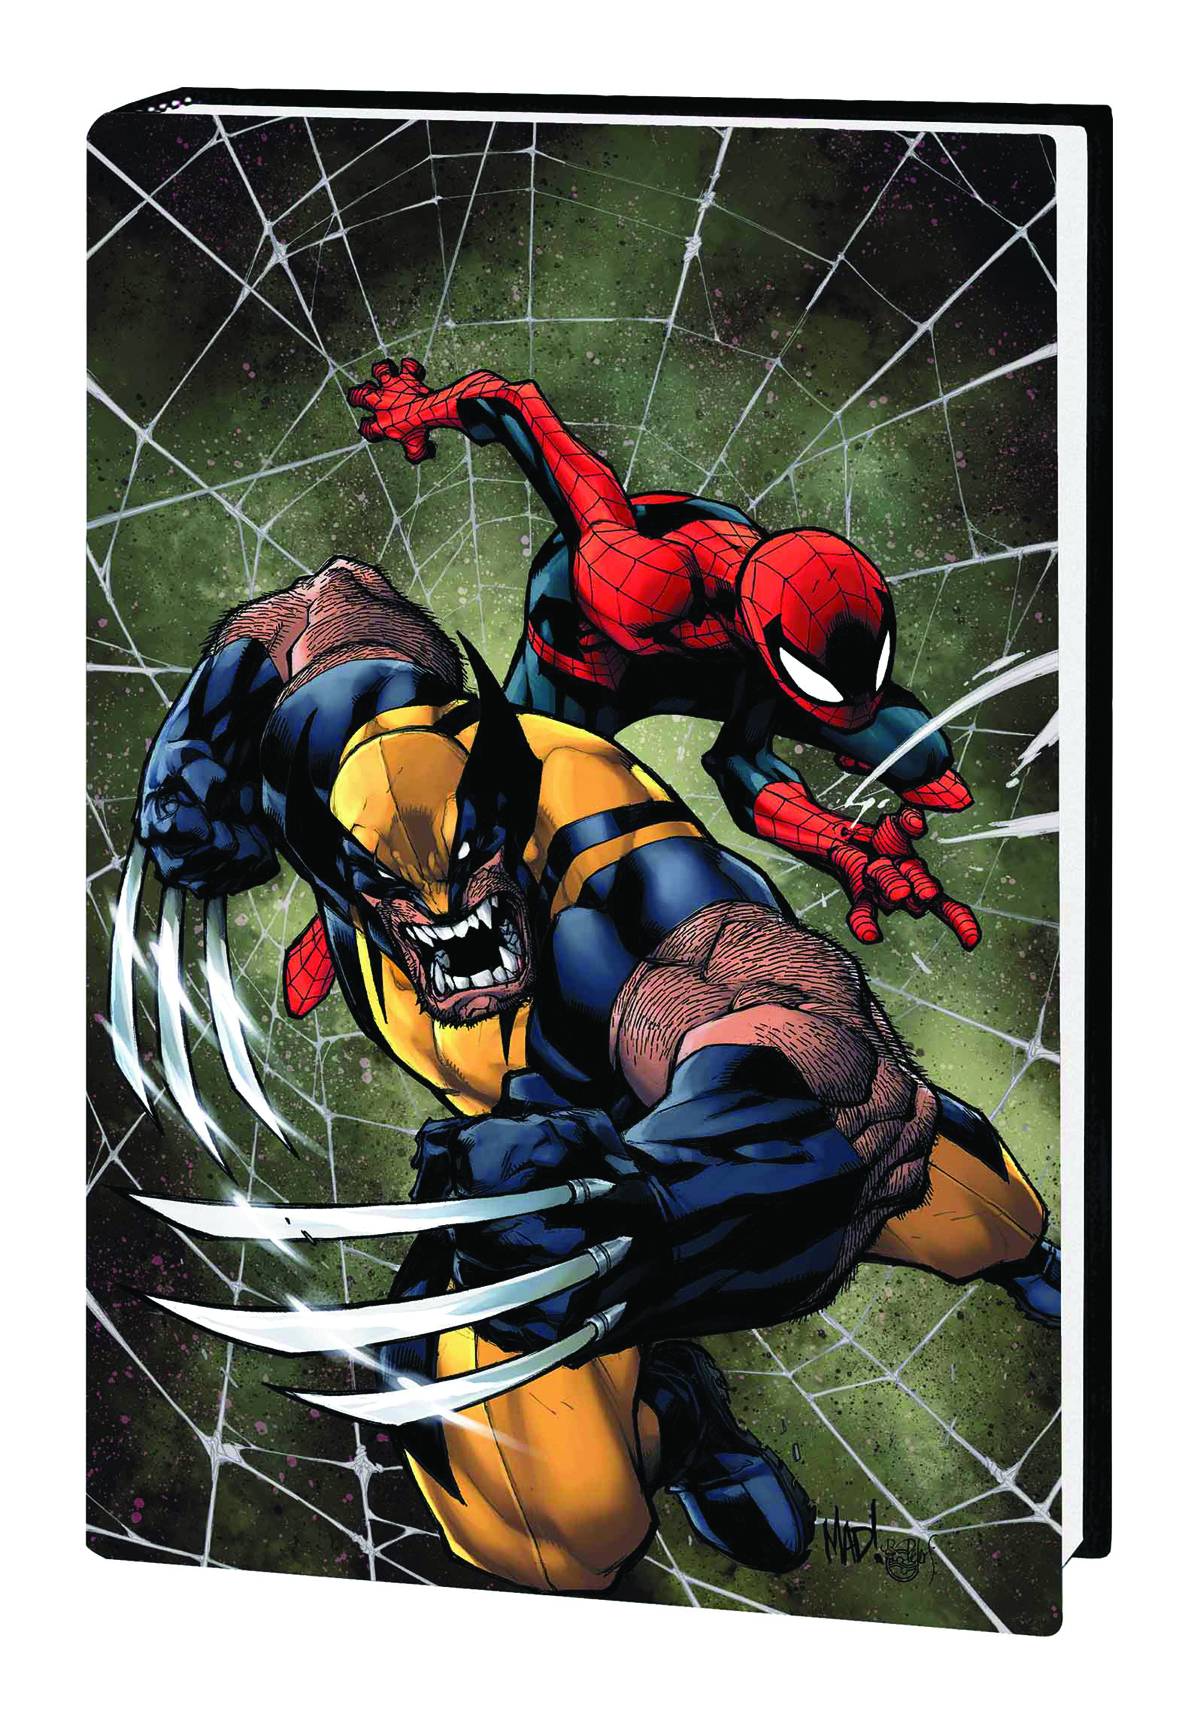 Spider-Man And Wolverine by Wells And Madureira Hardcover